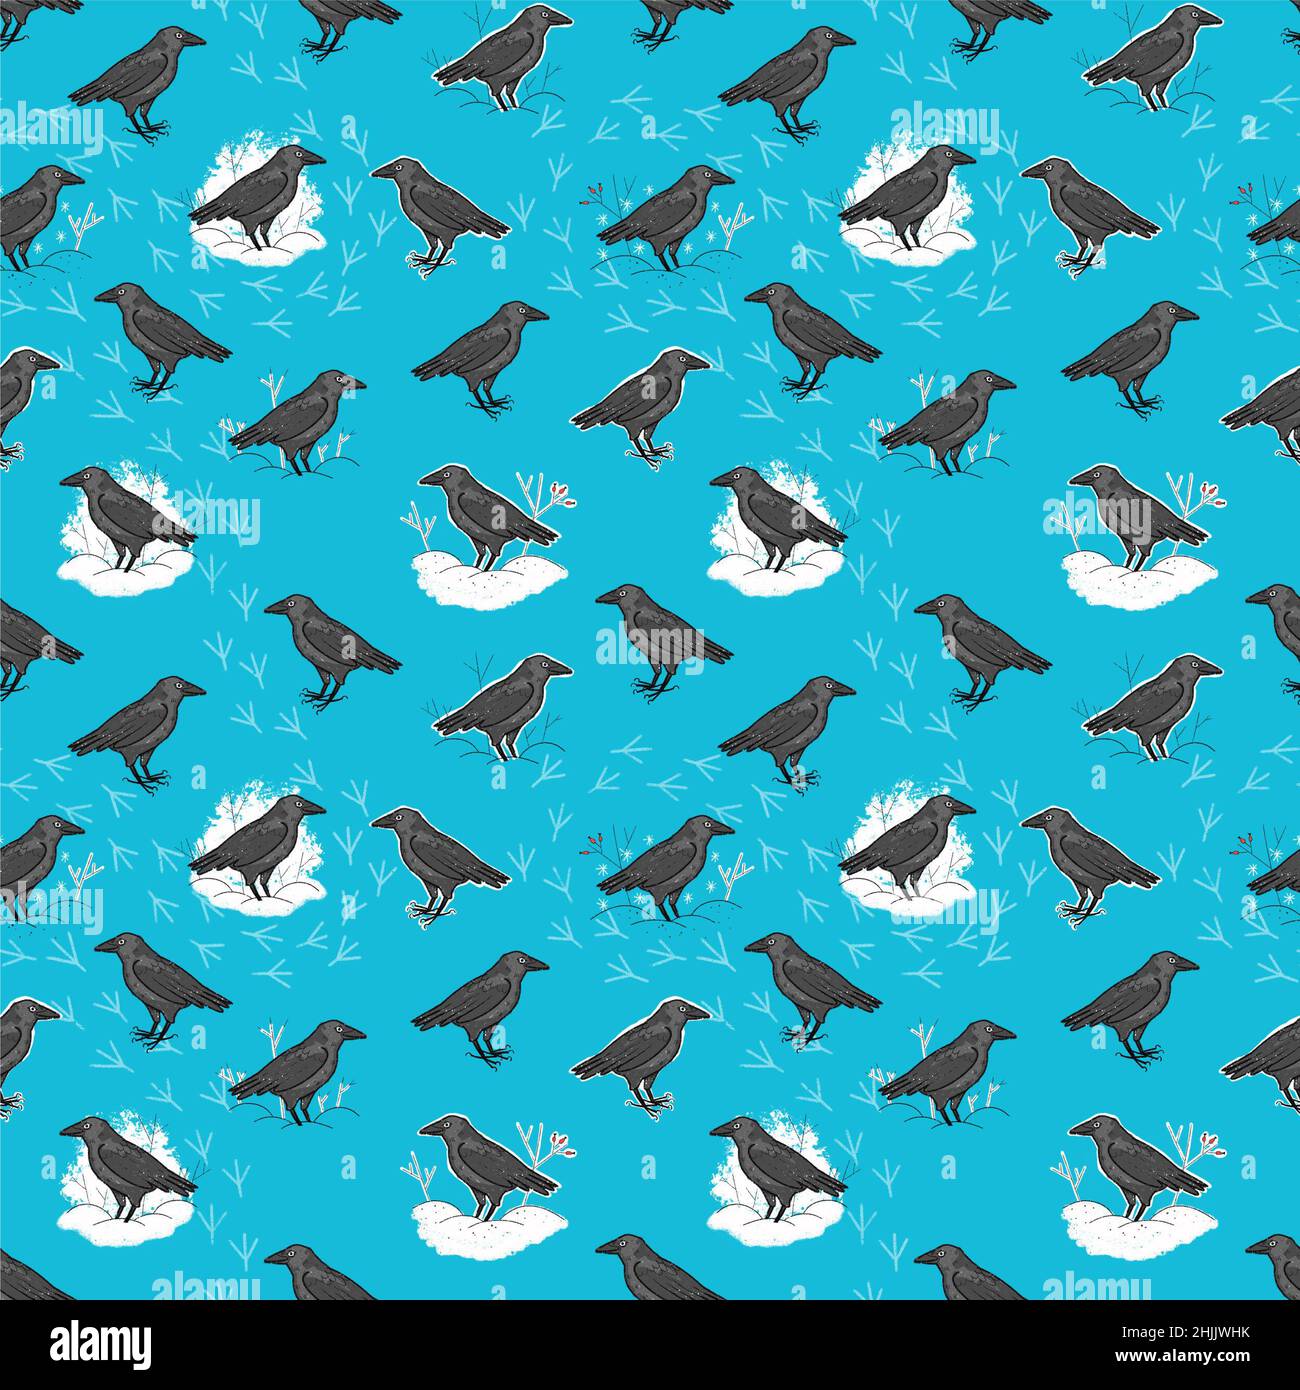 Seamless Pattern with cute crows or ravens in winter. Stock Photo